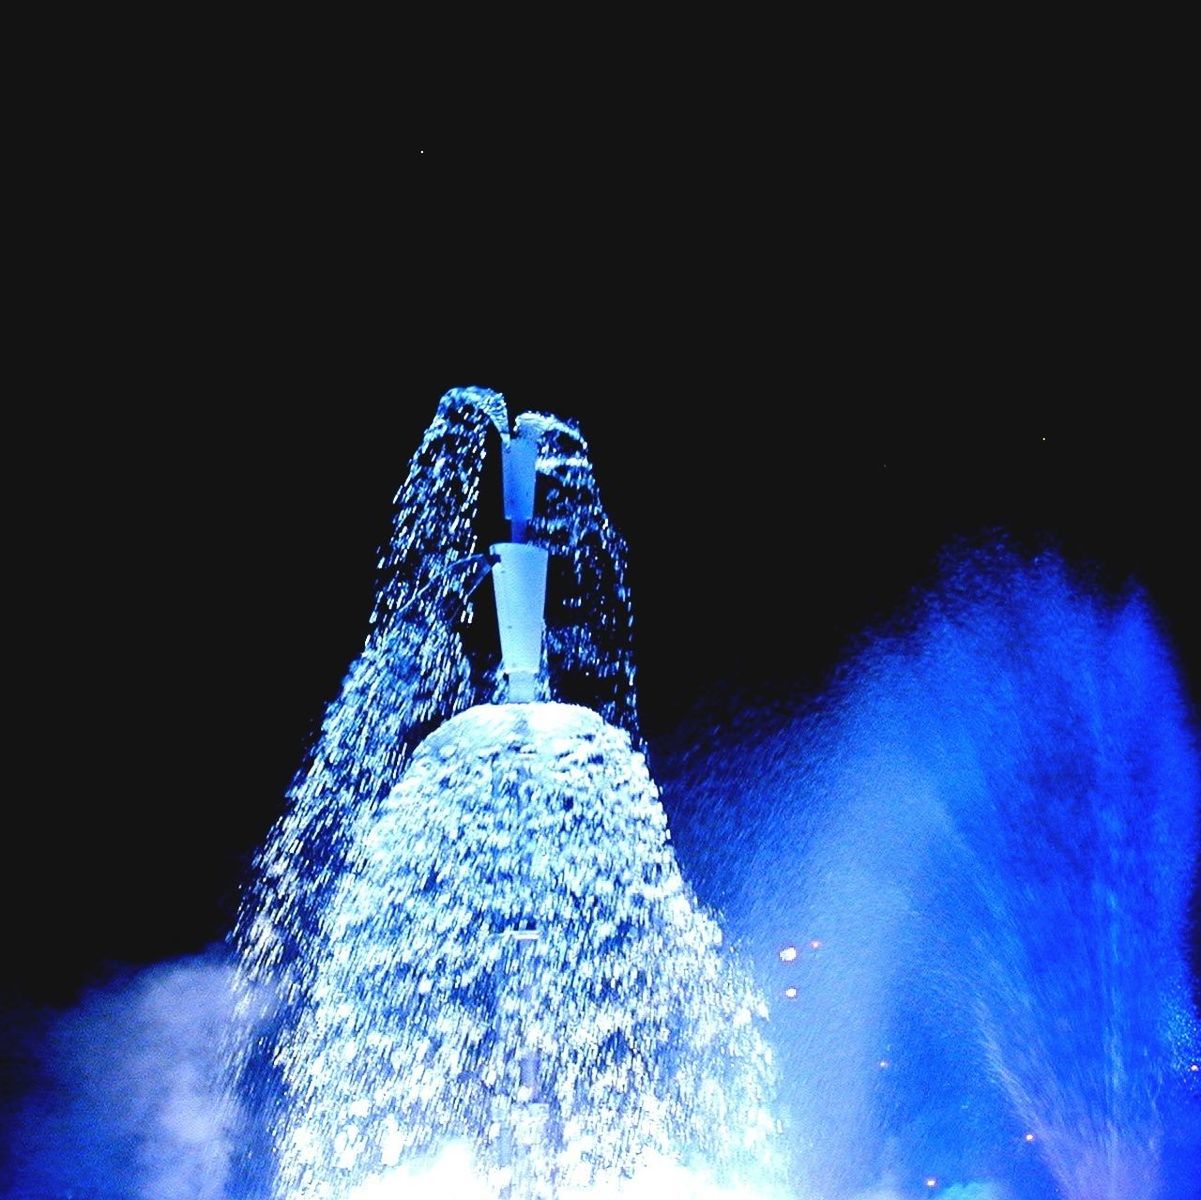 blue, illuminated, low angle view, copy space, night, lighting equipment, clear sky, glowing, winter, outdoors, cold temperature, water, light - natural phenomenon, sky, snow, no people, built structure, purple, fountain, nature